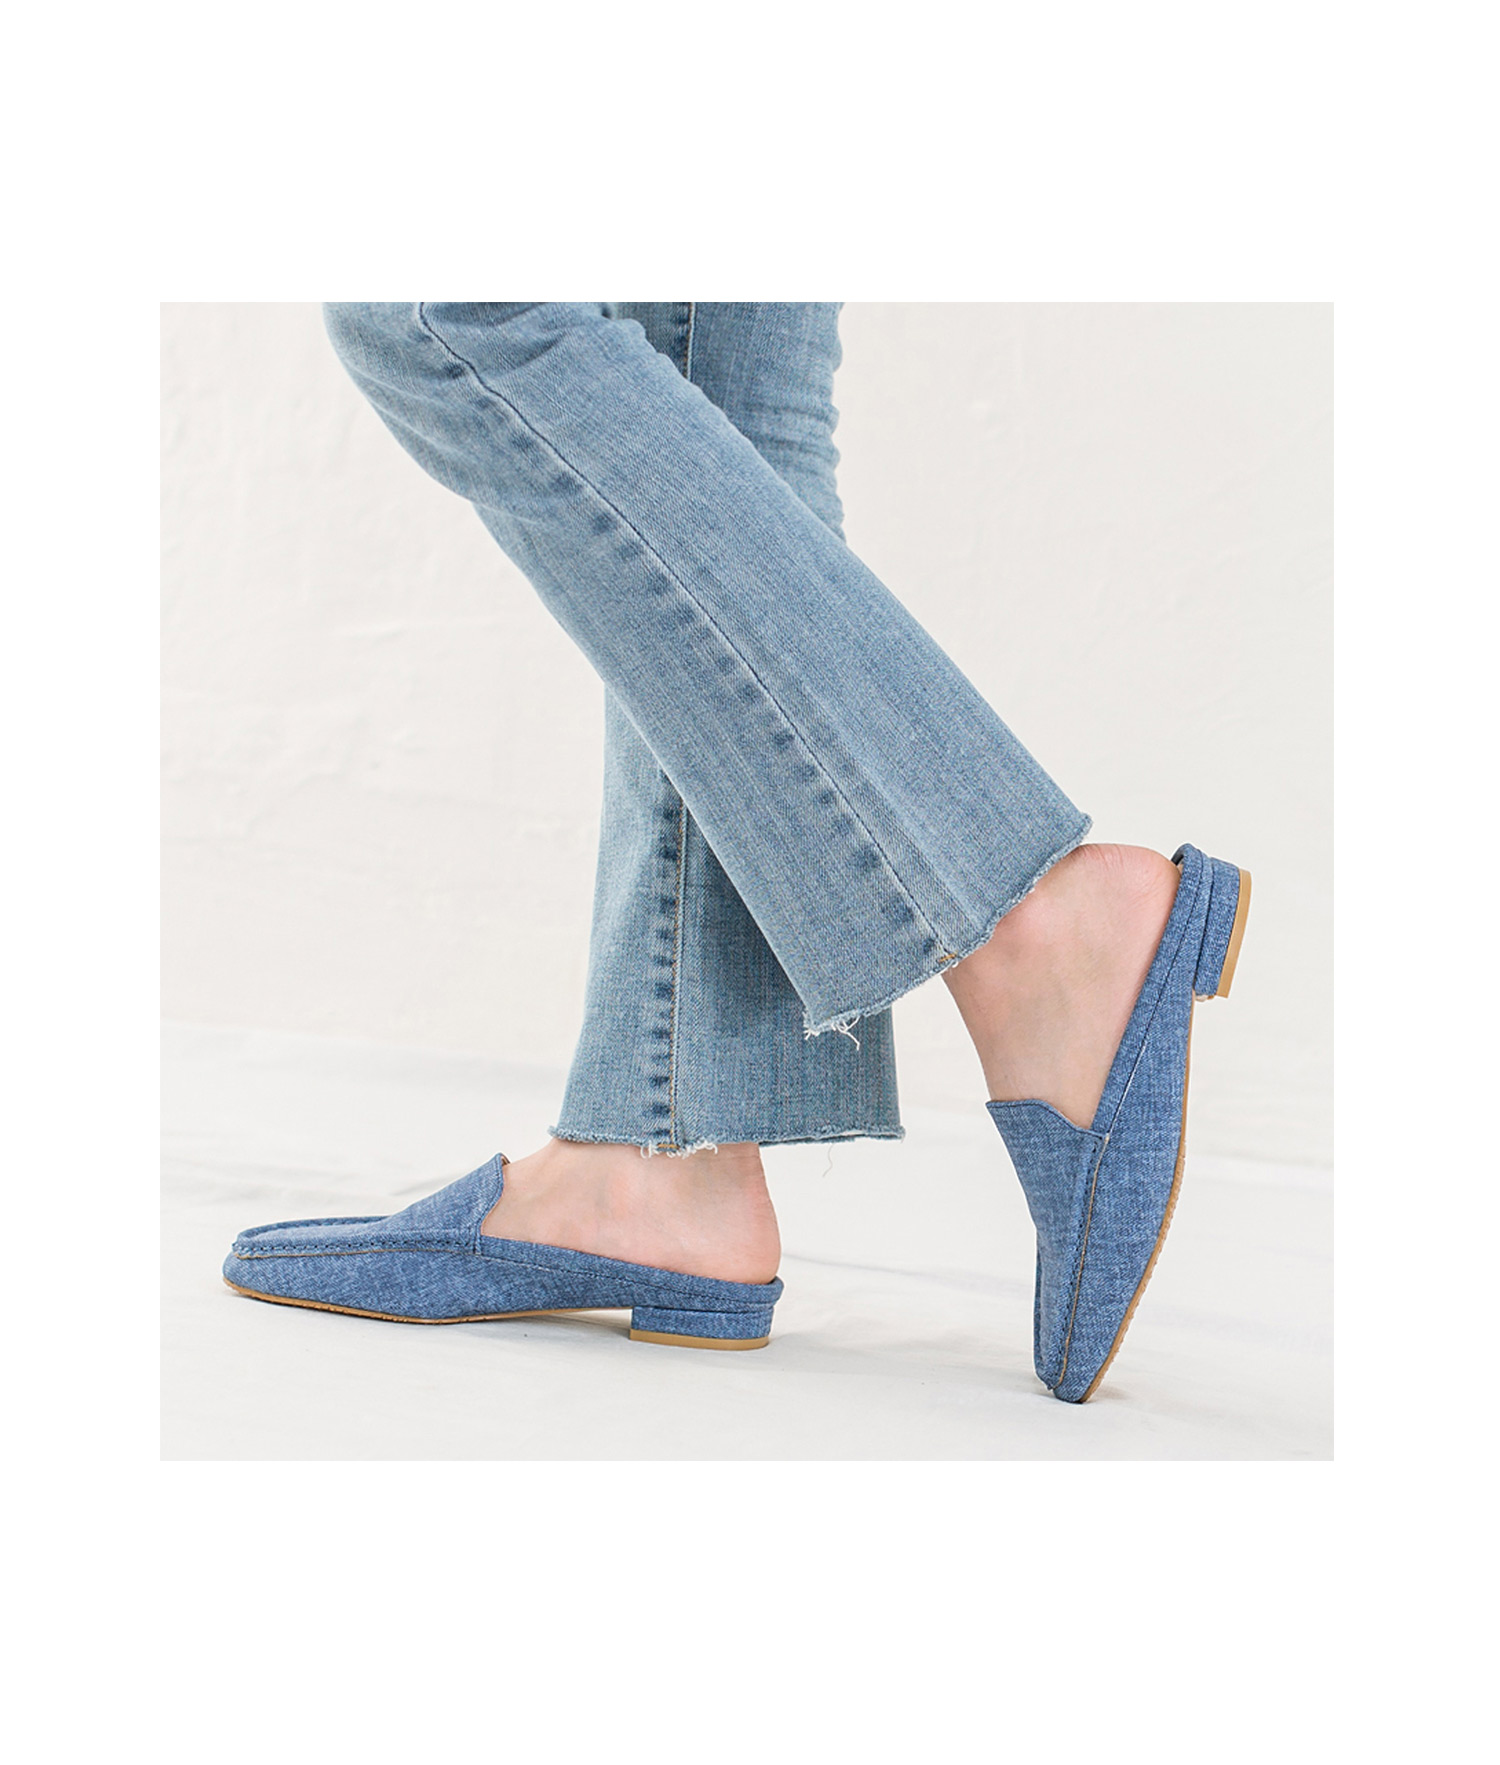 Chambray Denim Loafer Mules